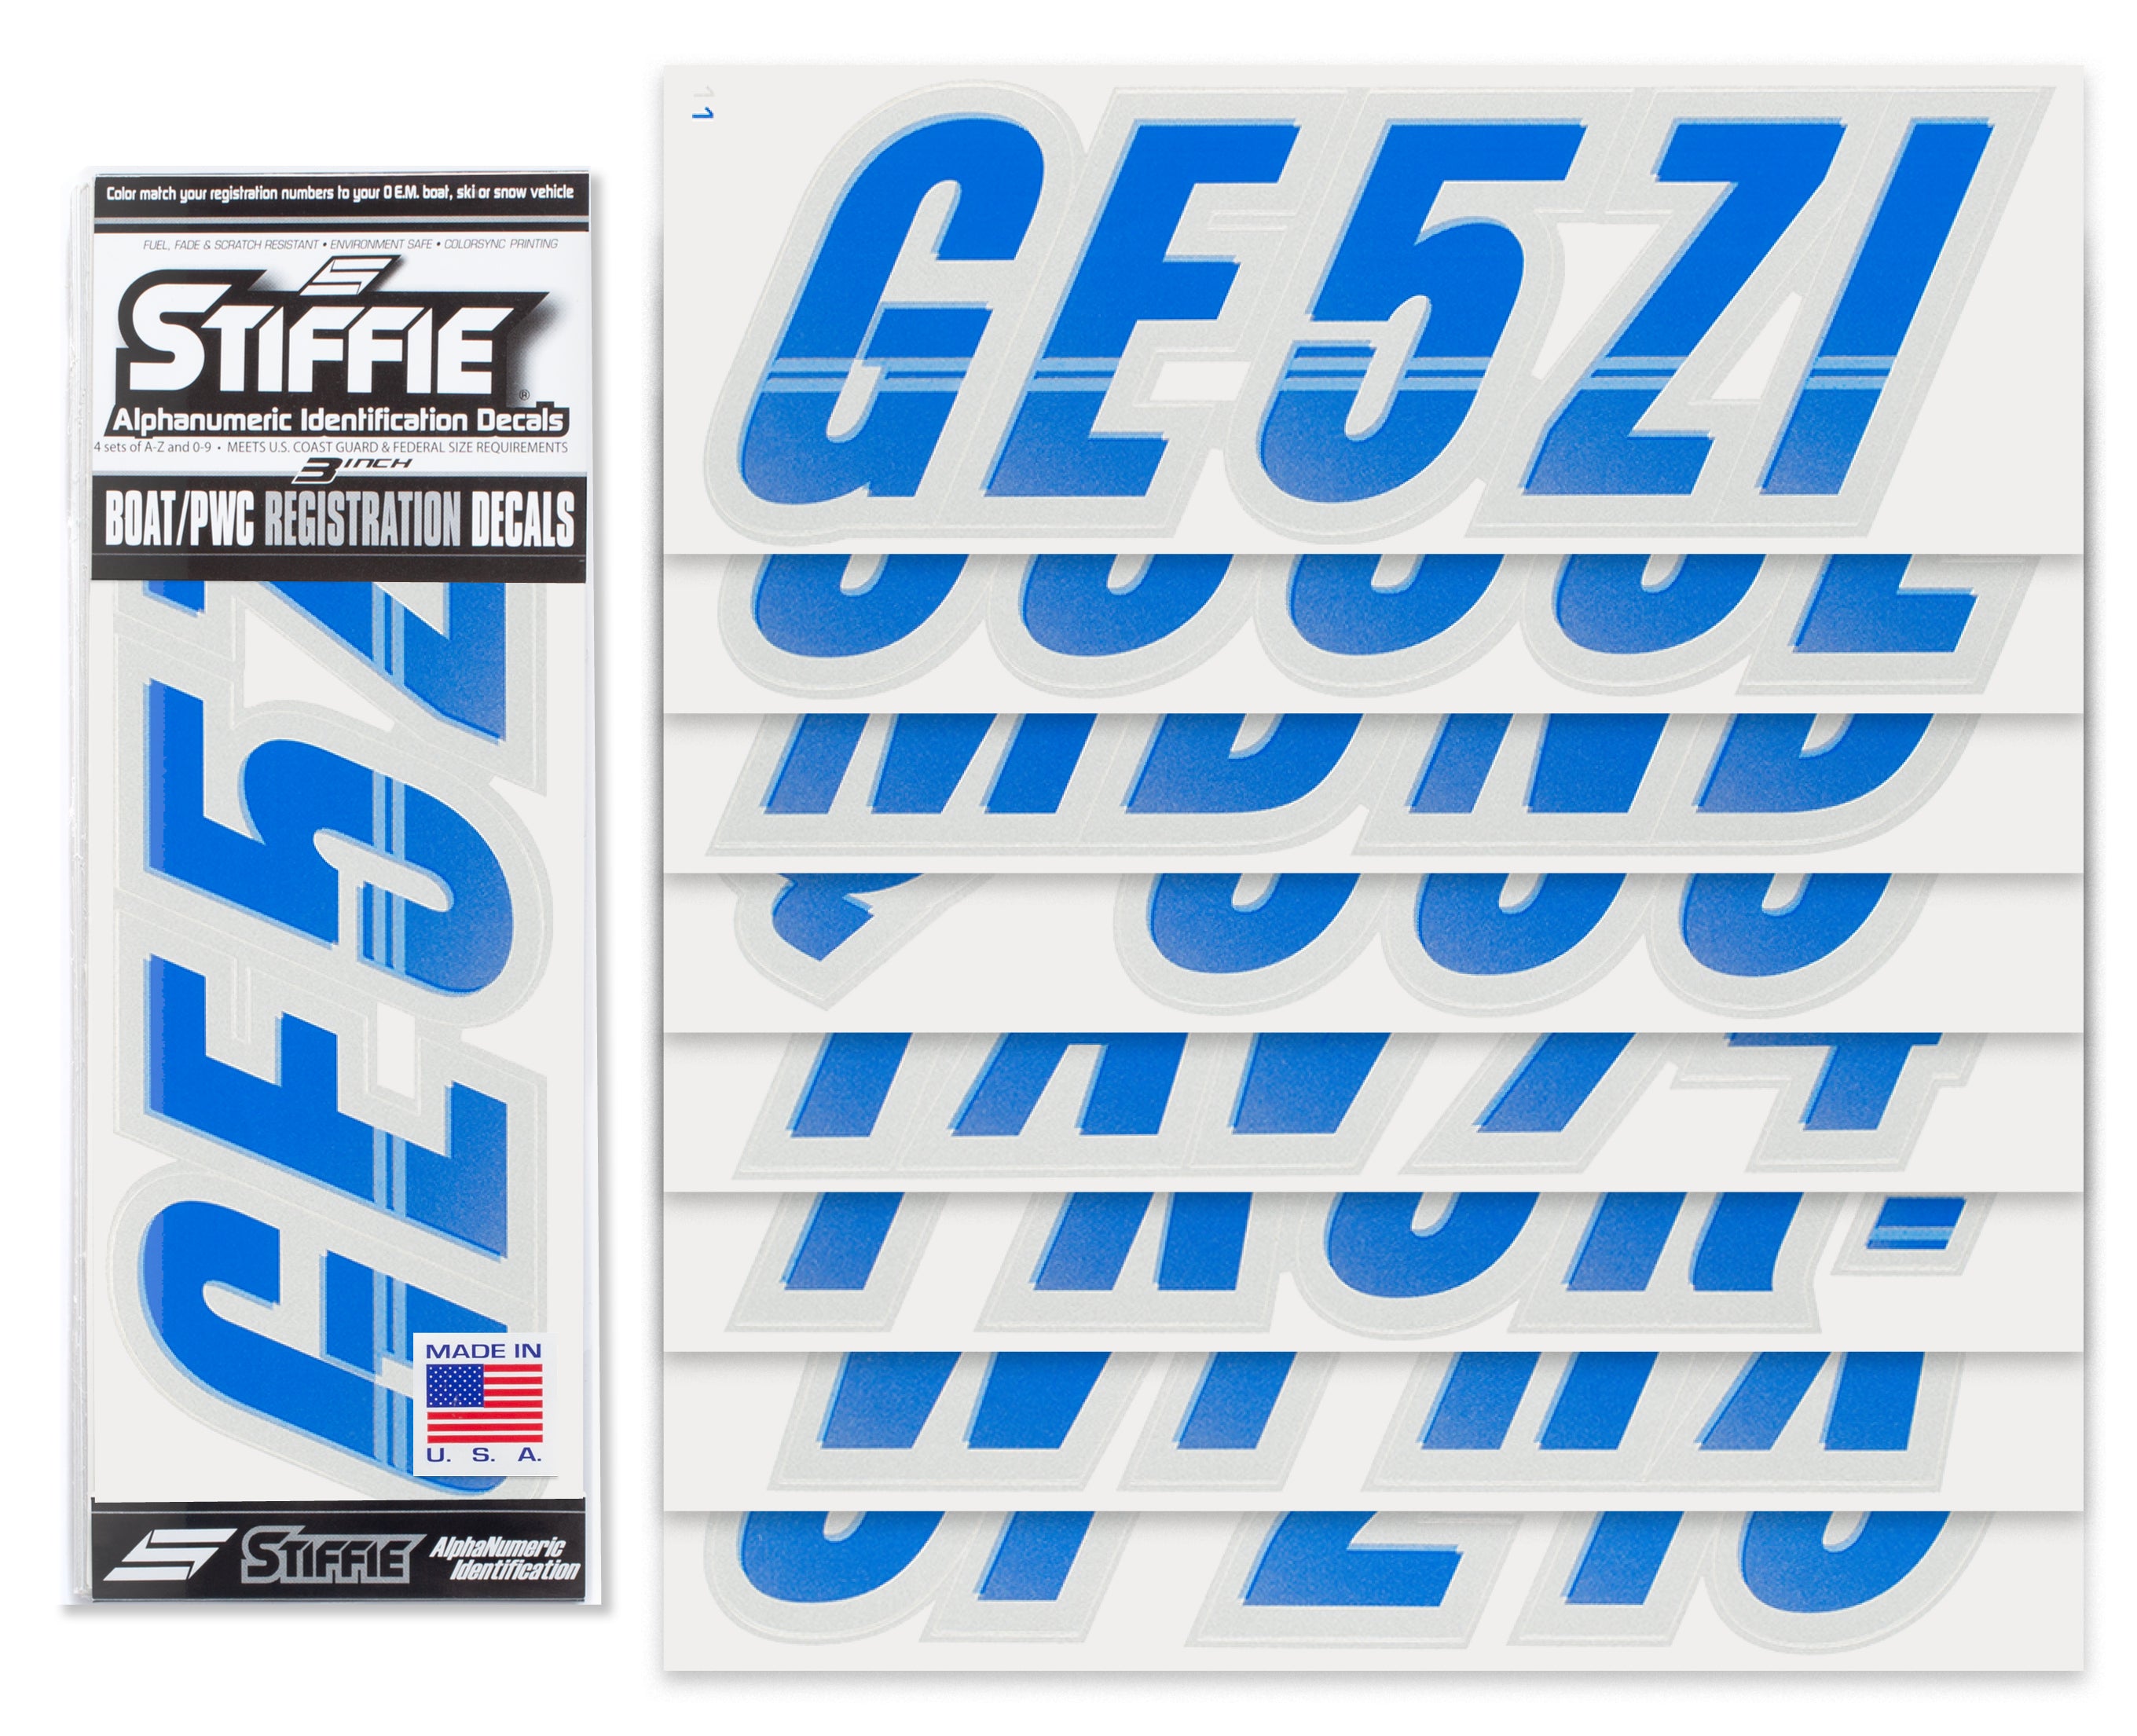 STIFFIE Techtron Blue/Silver 3" Alpha-Numeric Registration Identification Numbers Stickers Decals for Boats & Personal Watercraft